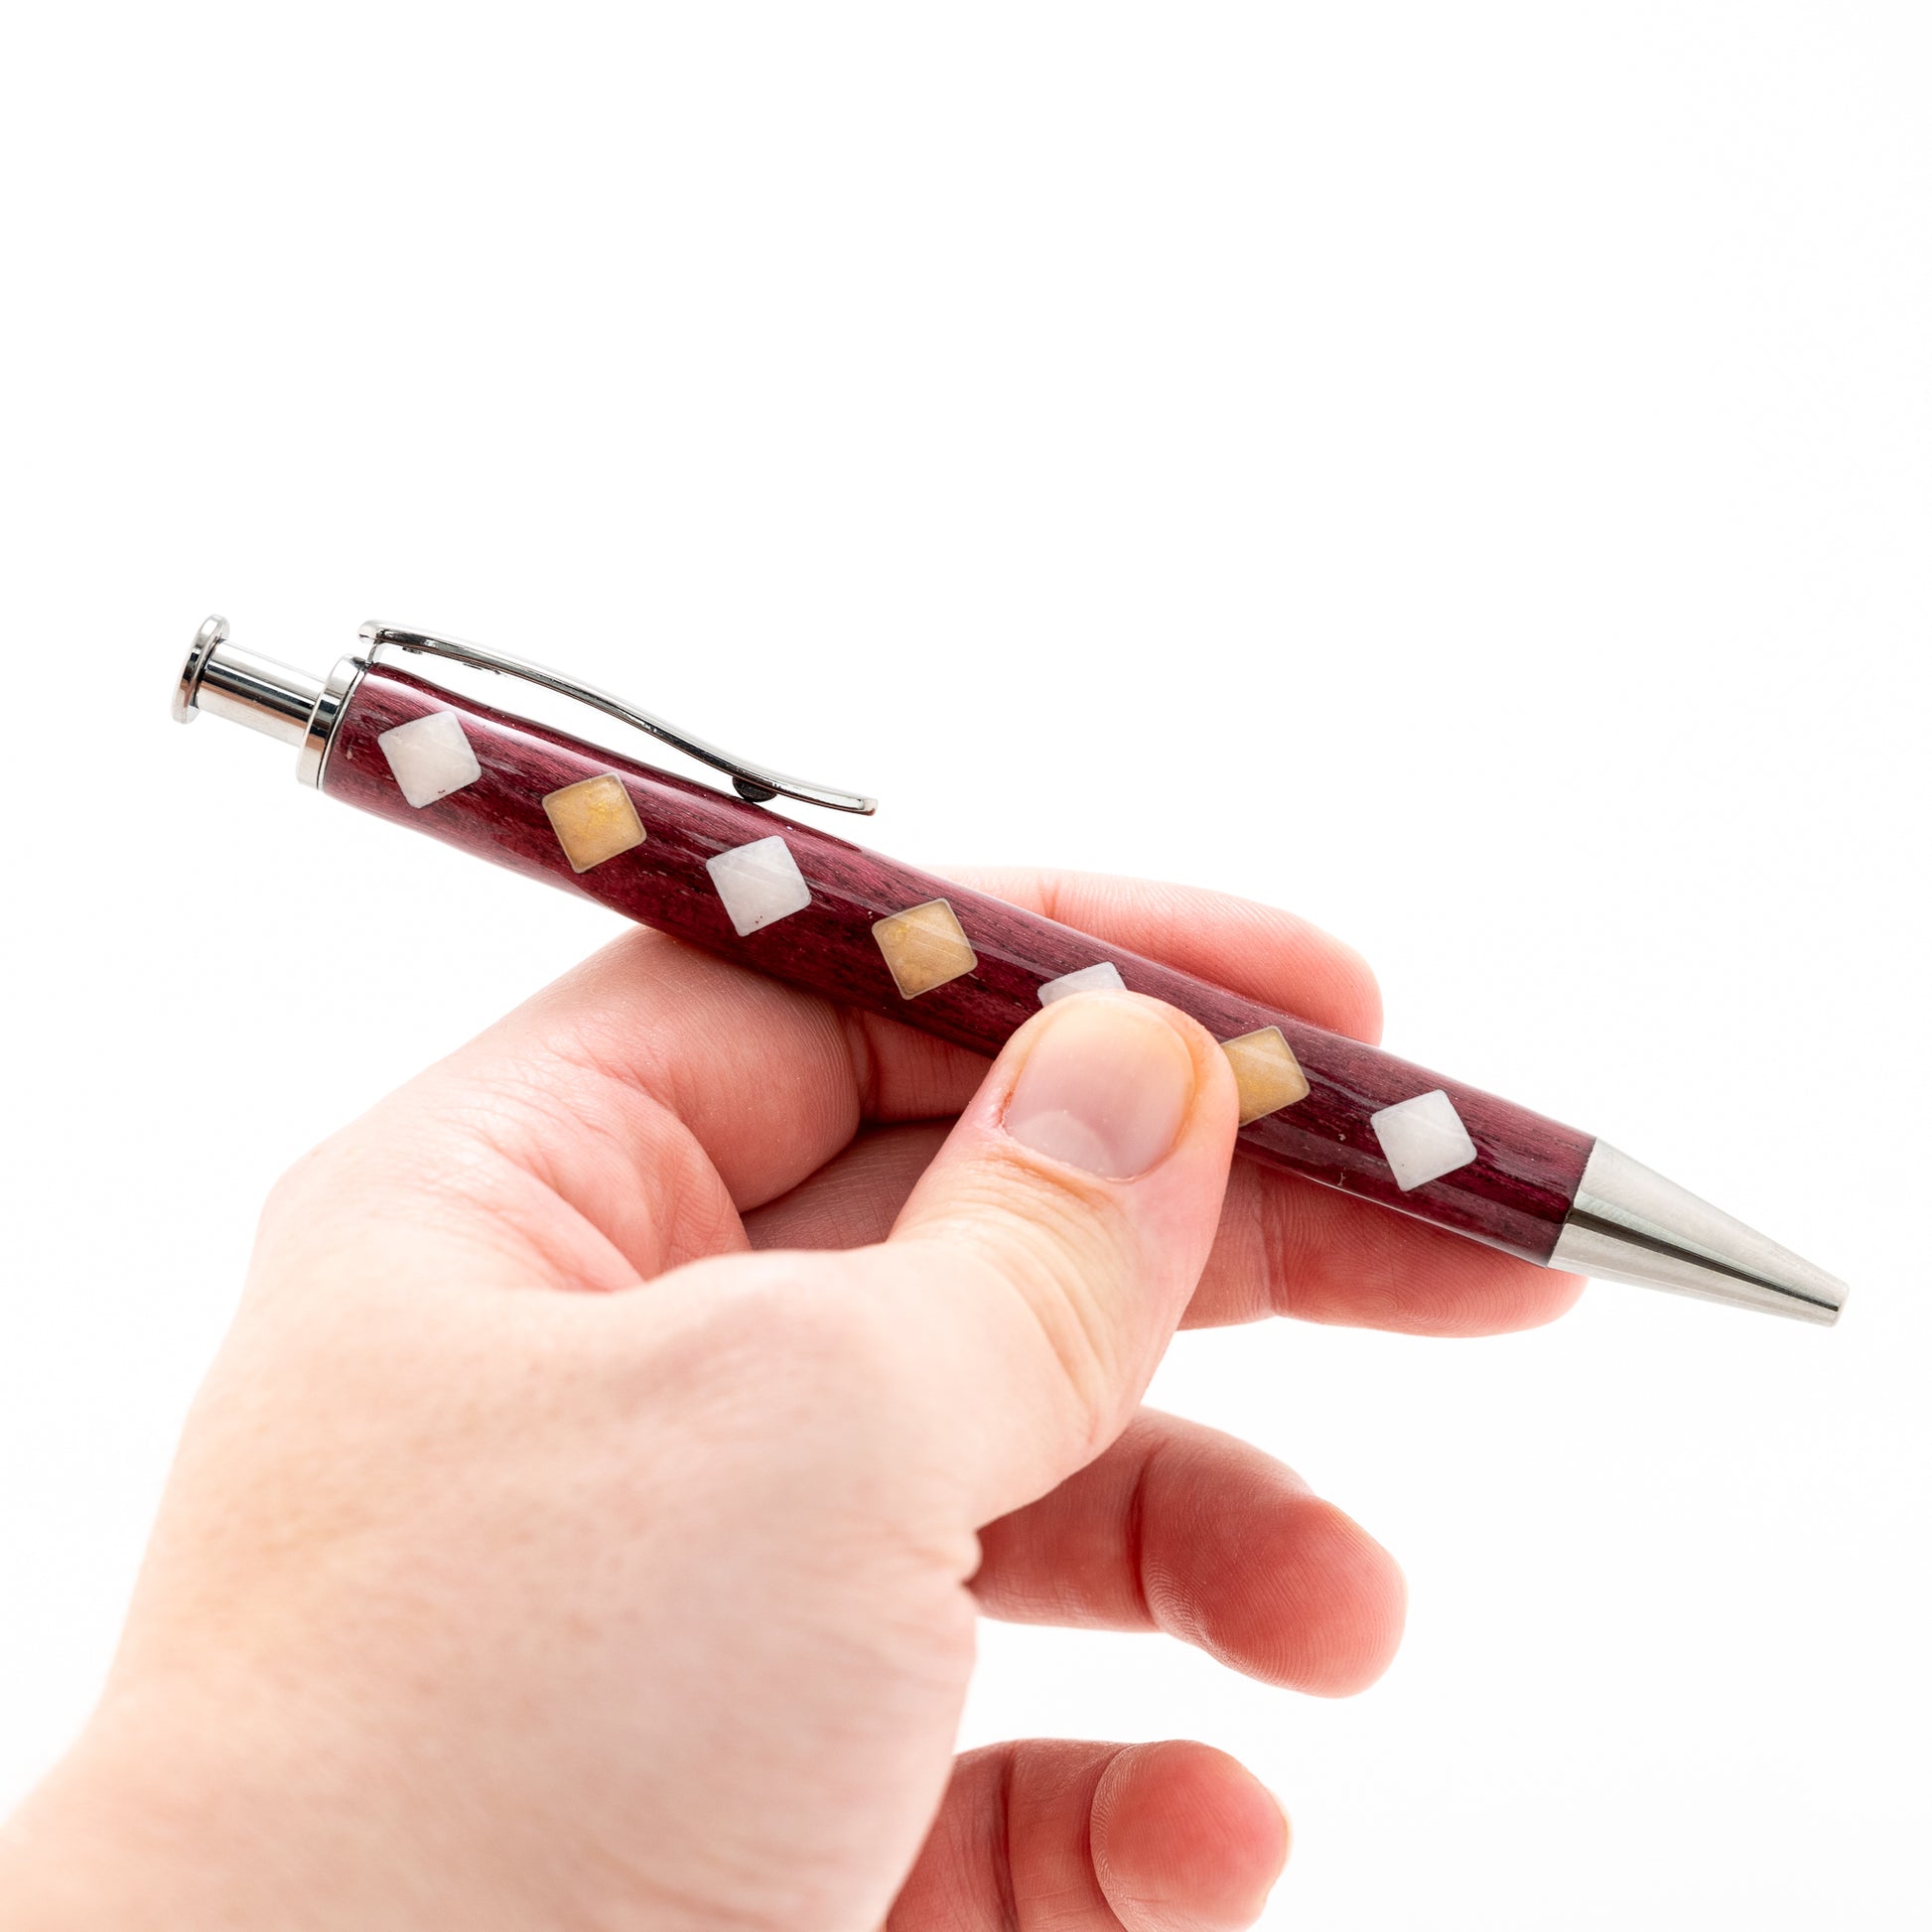 Handmade purpleheart wood click pen with seven alternating colored resin filled diamonds